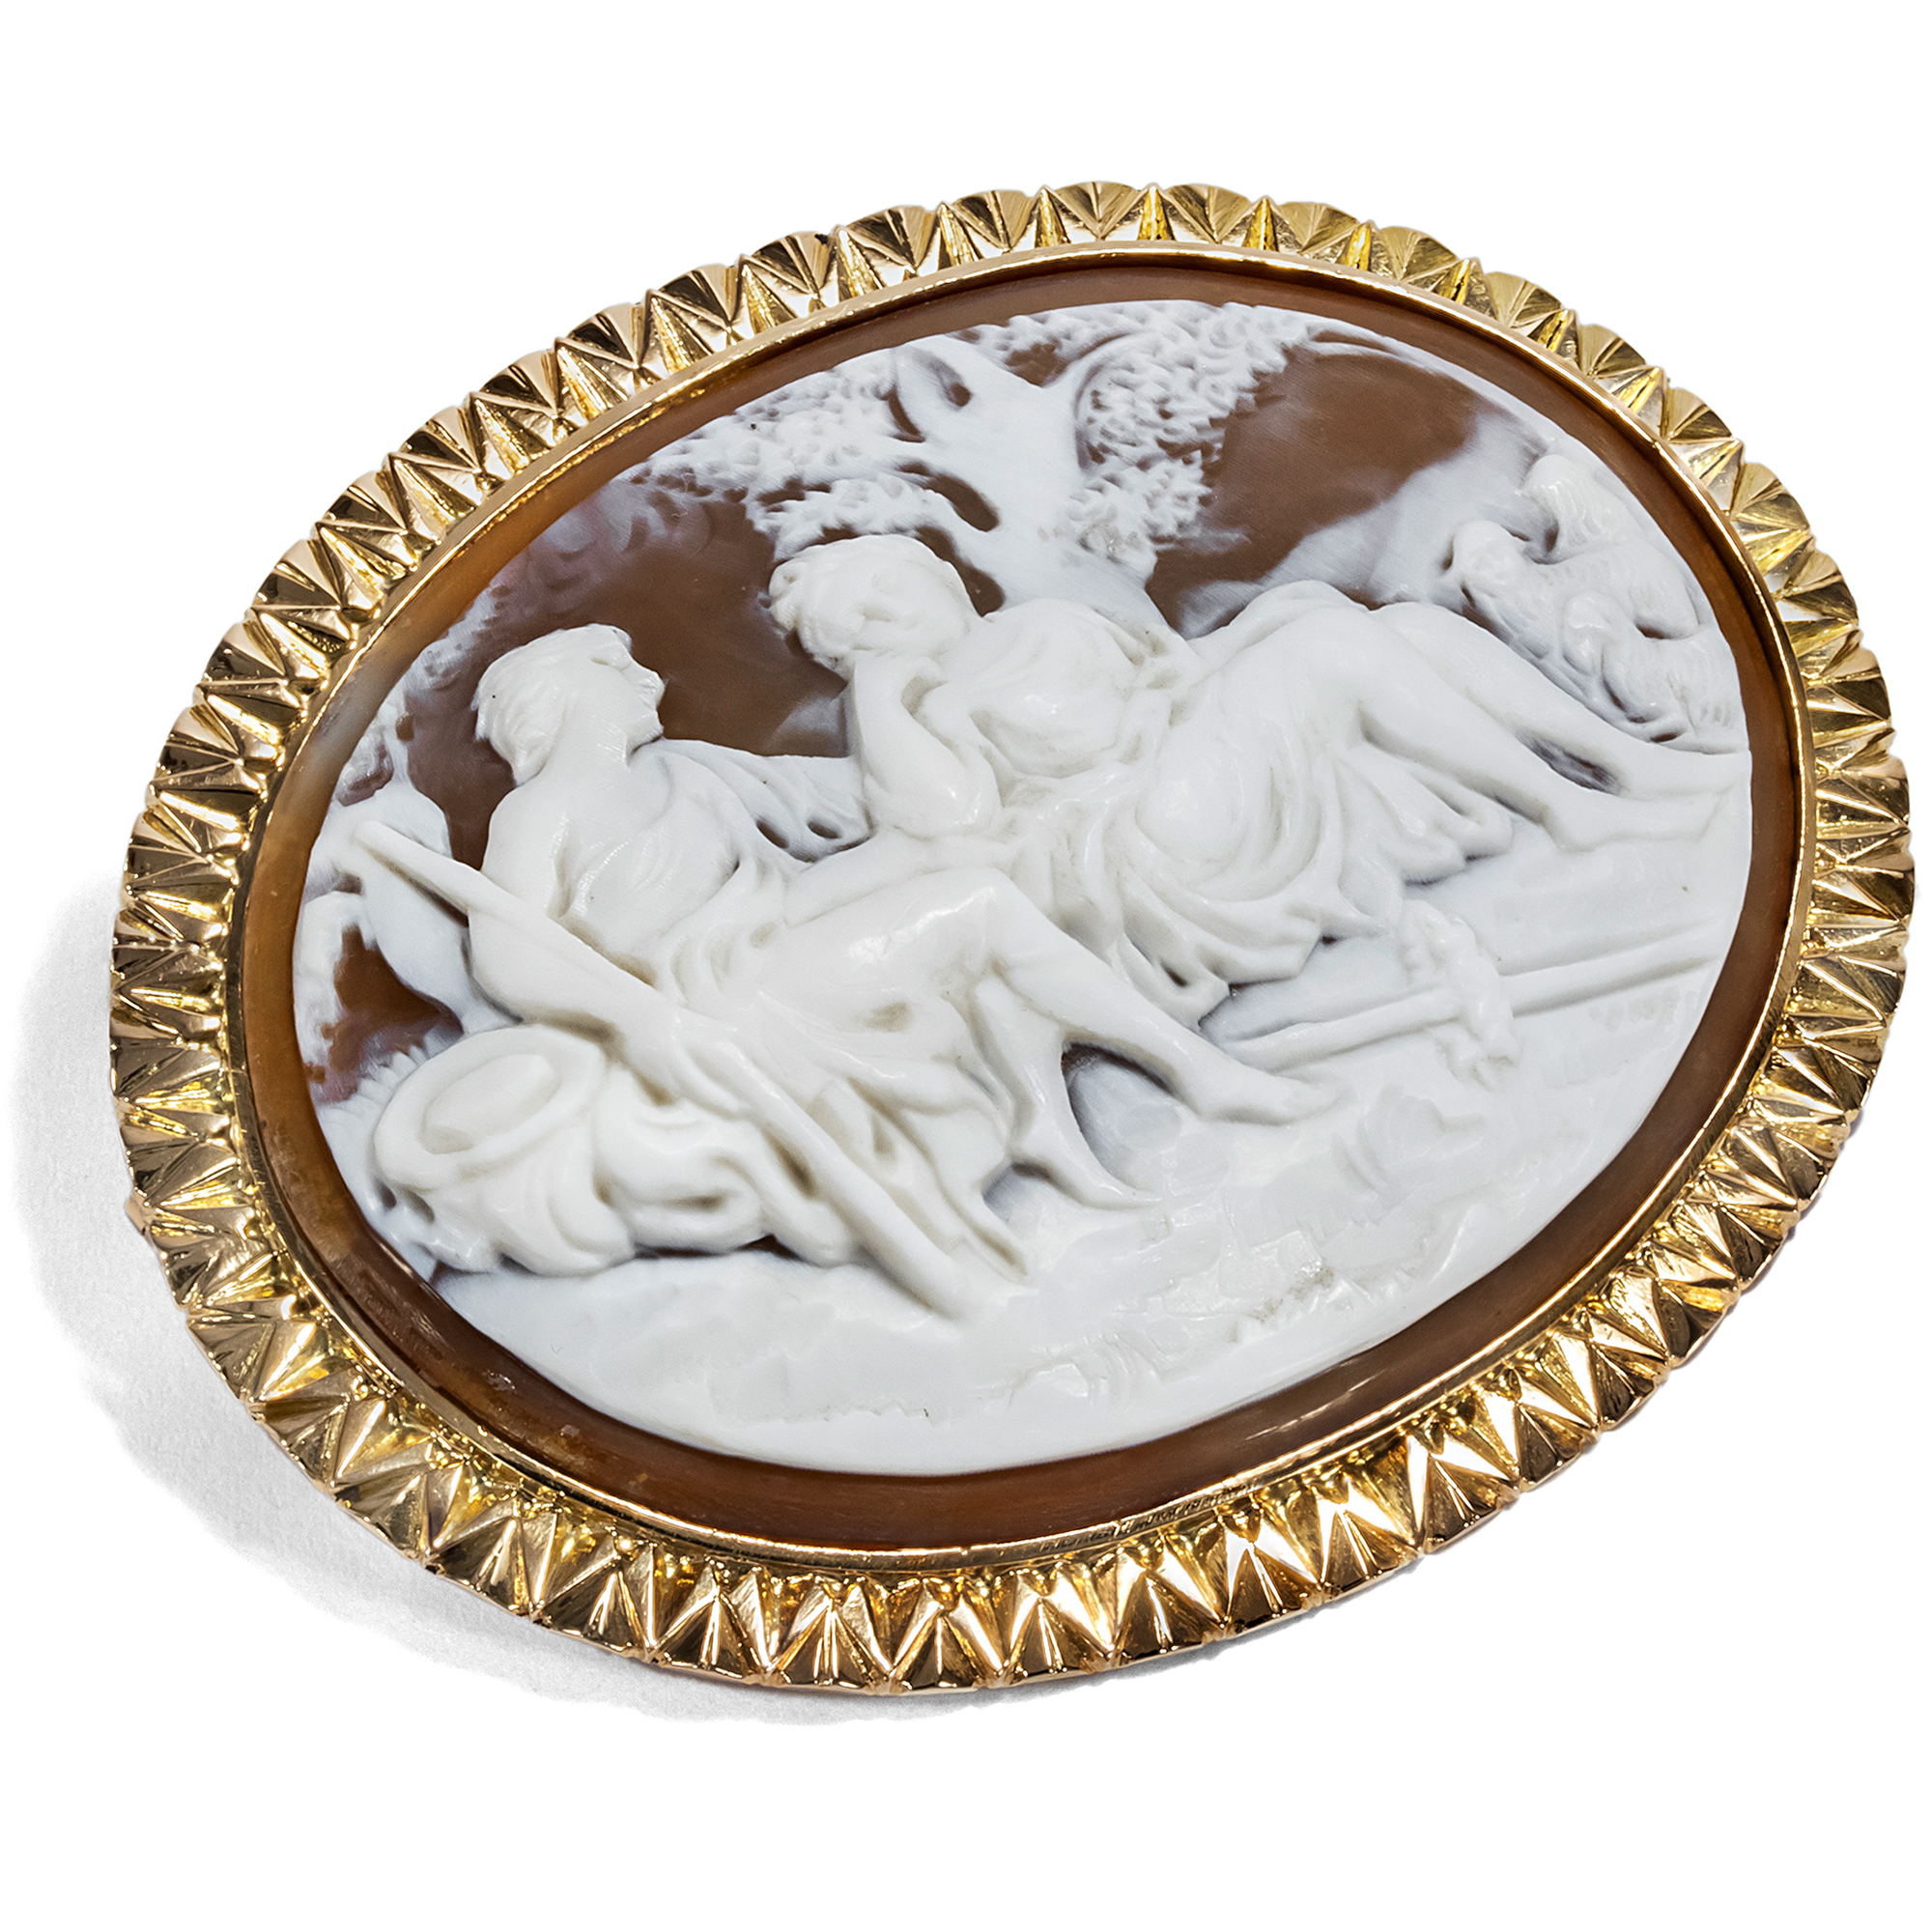 Bucolic shell cameo set in gold as a brooch, circa 1875